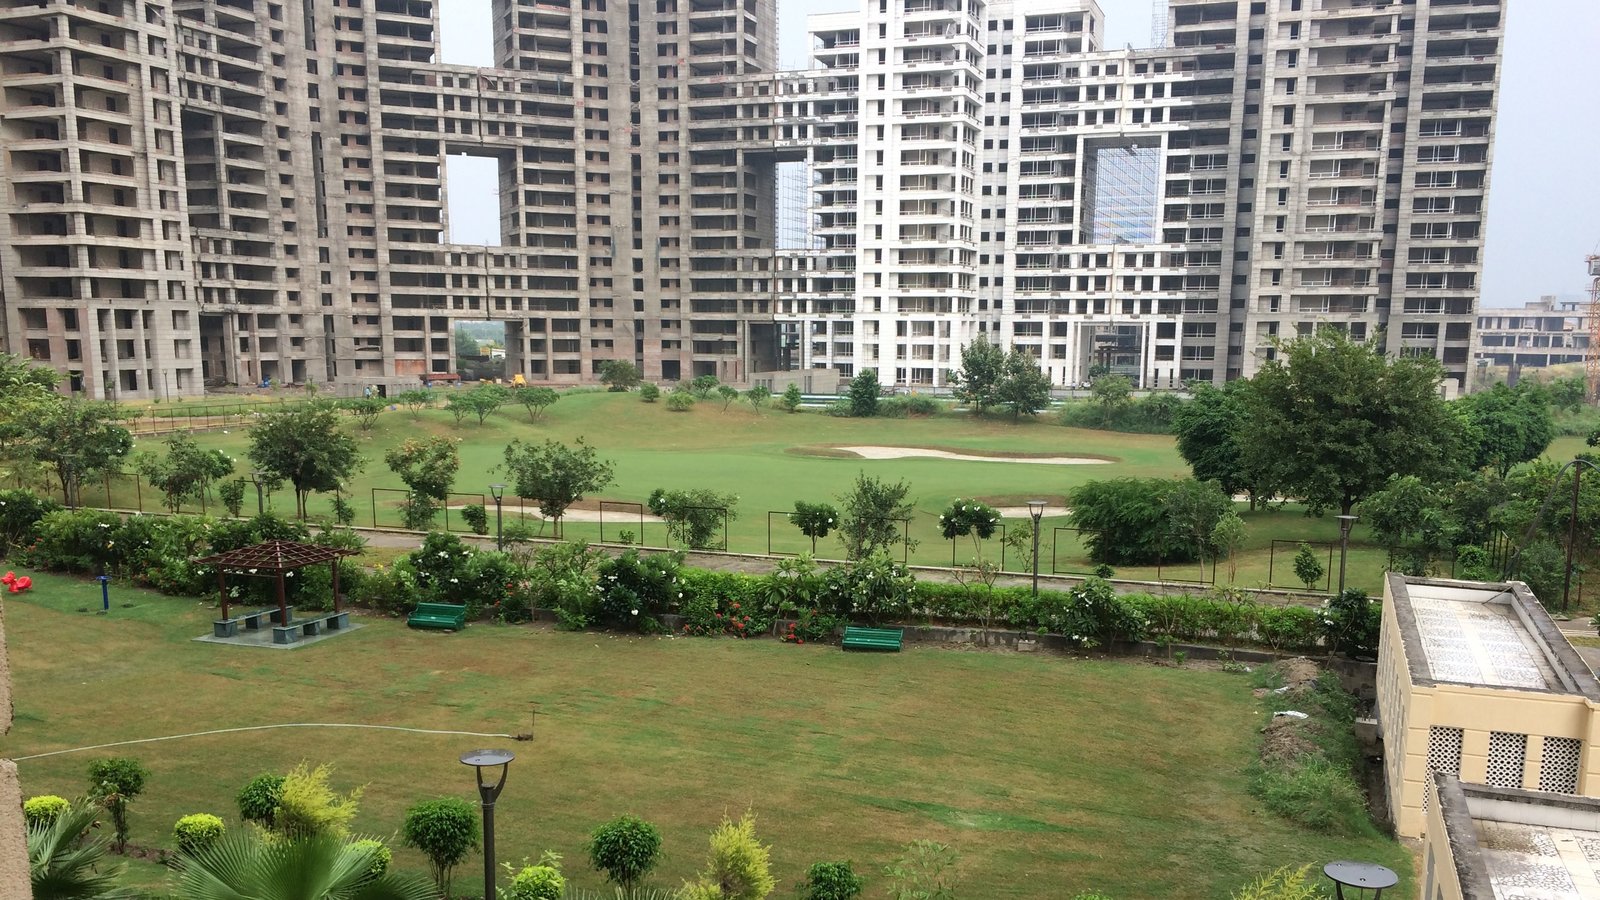 Jaypee Wishtown, Jaypee homebuyers, Jaypee cheated homebuyers, Jaypee Group Insolvency, Legal options for Jaypee homebuyers, Homebuyers asking Jaypee Group, India real estate news, Real estate news India, Indian property market news, Investment with Jaypee Group, Track2Media Research, Track2Realty